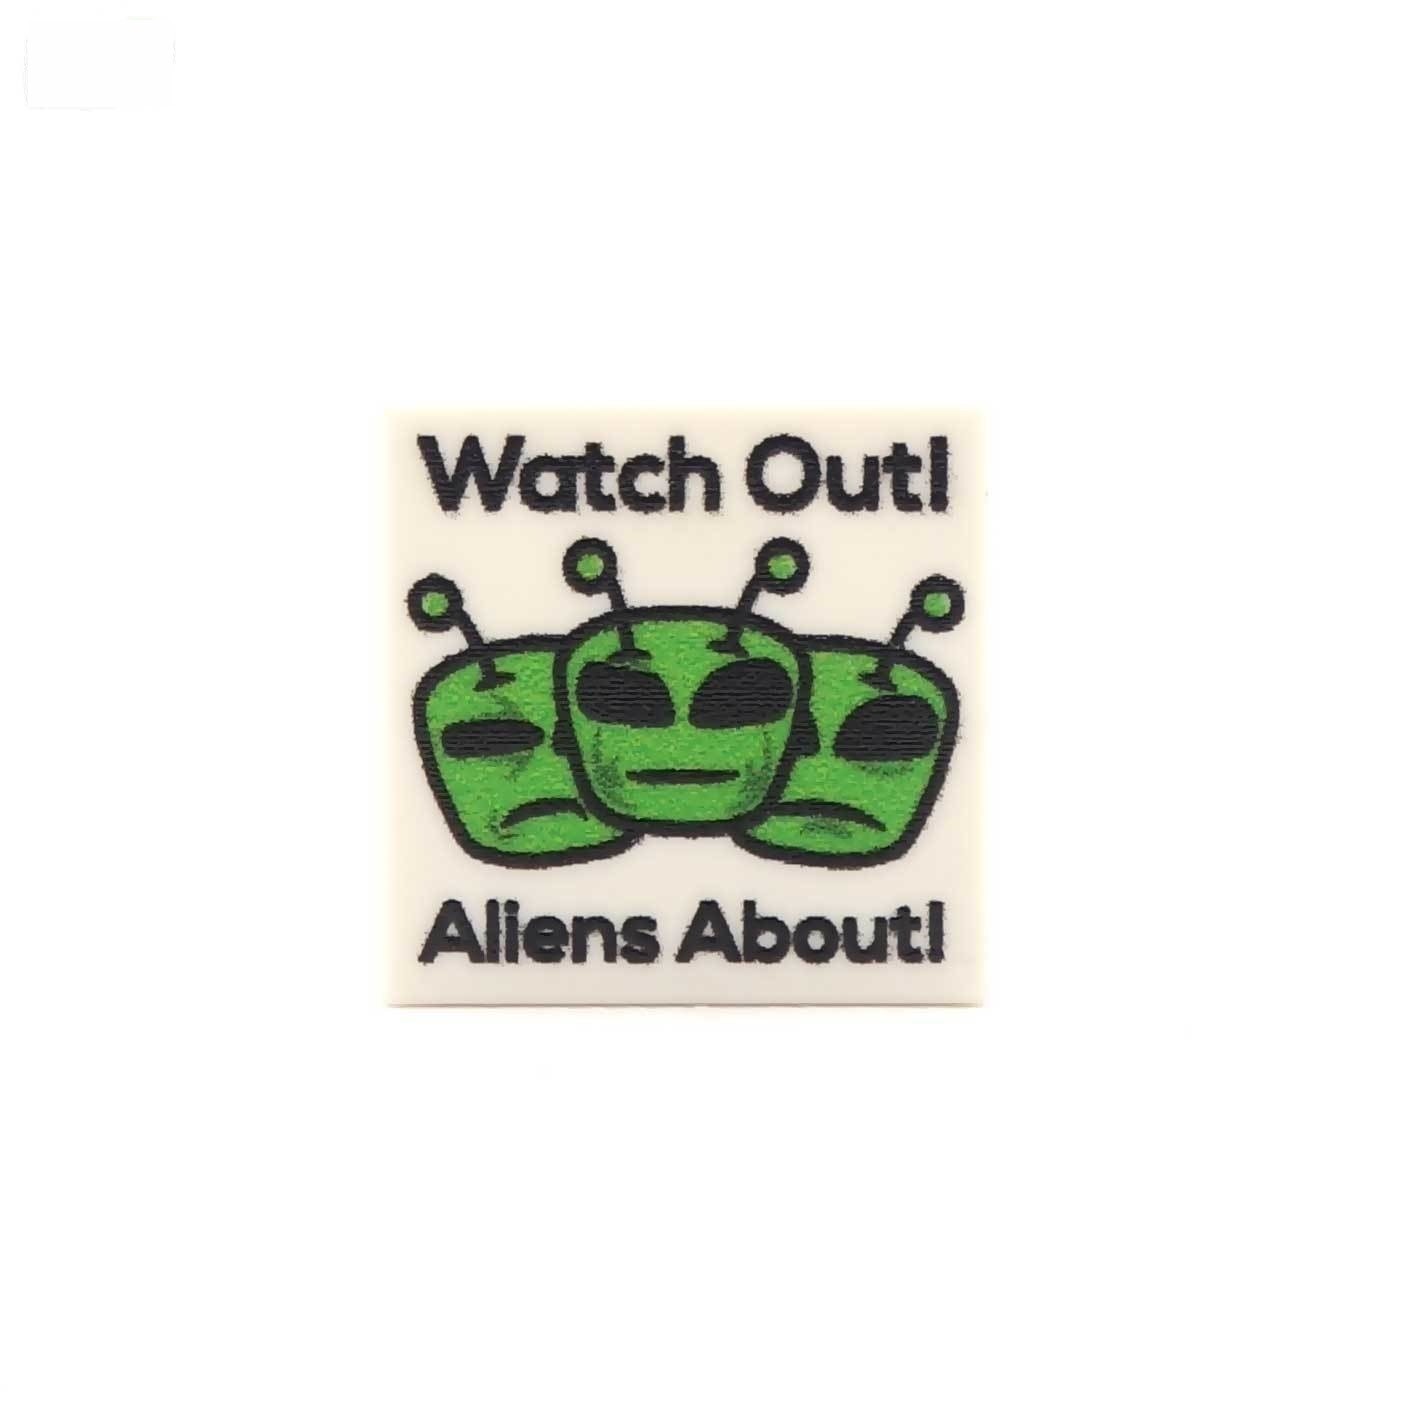 Aliens About - Custom Printed LEGO Tiles and LEGO Accessories